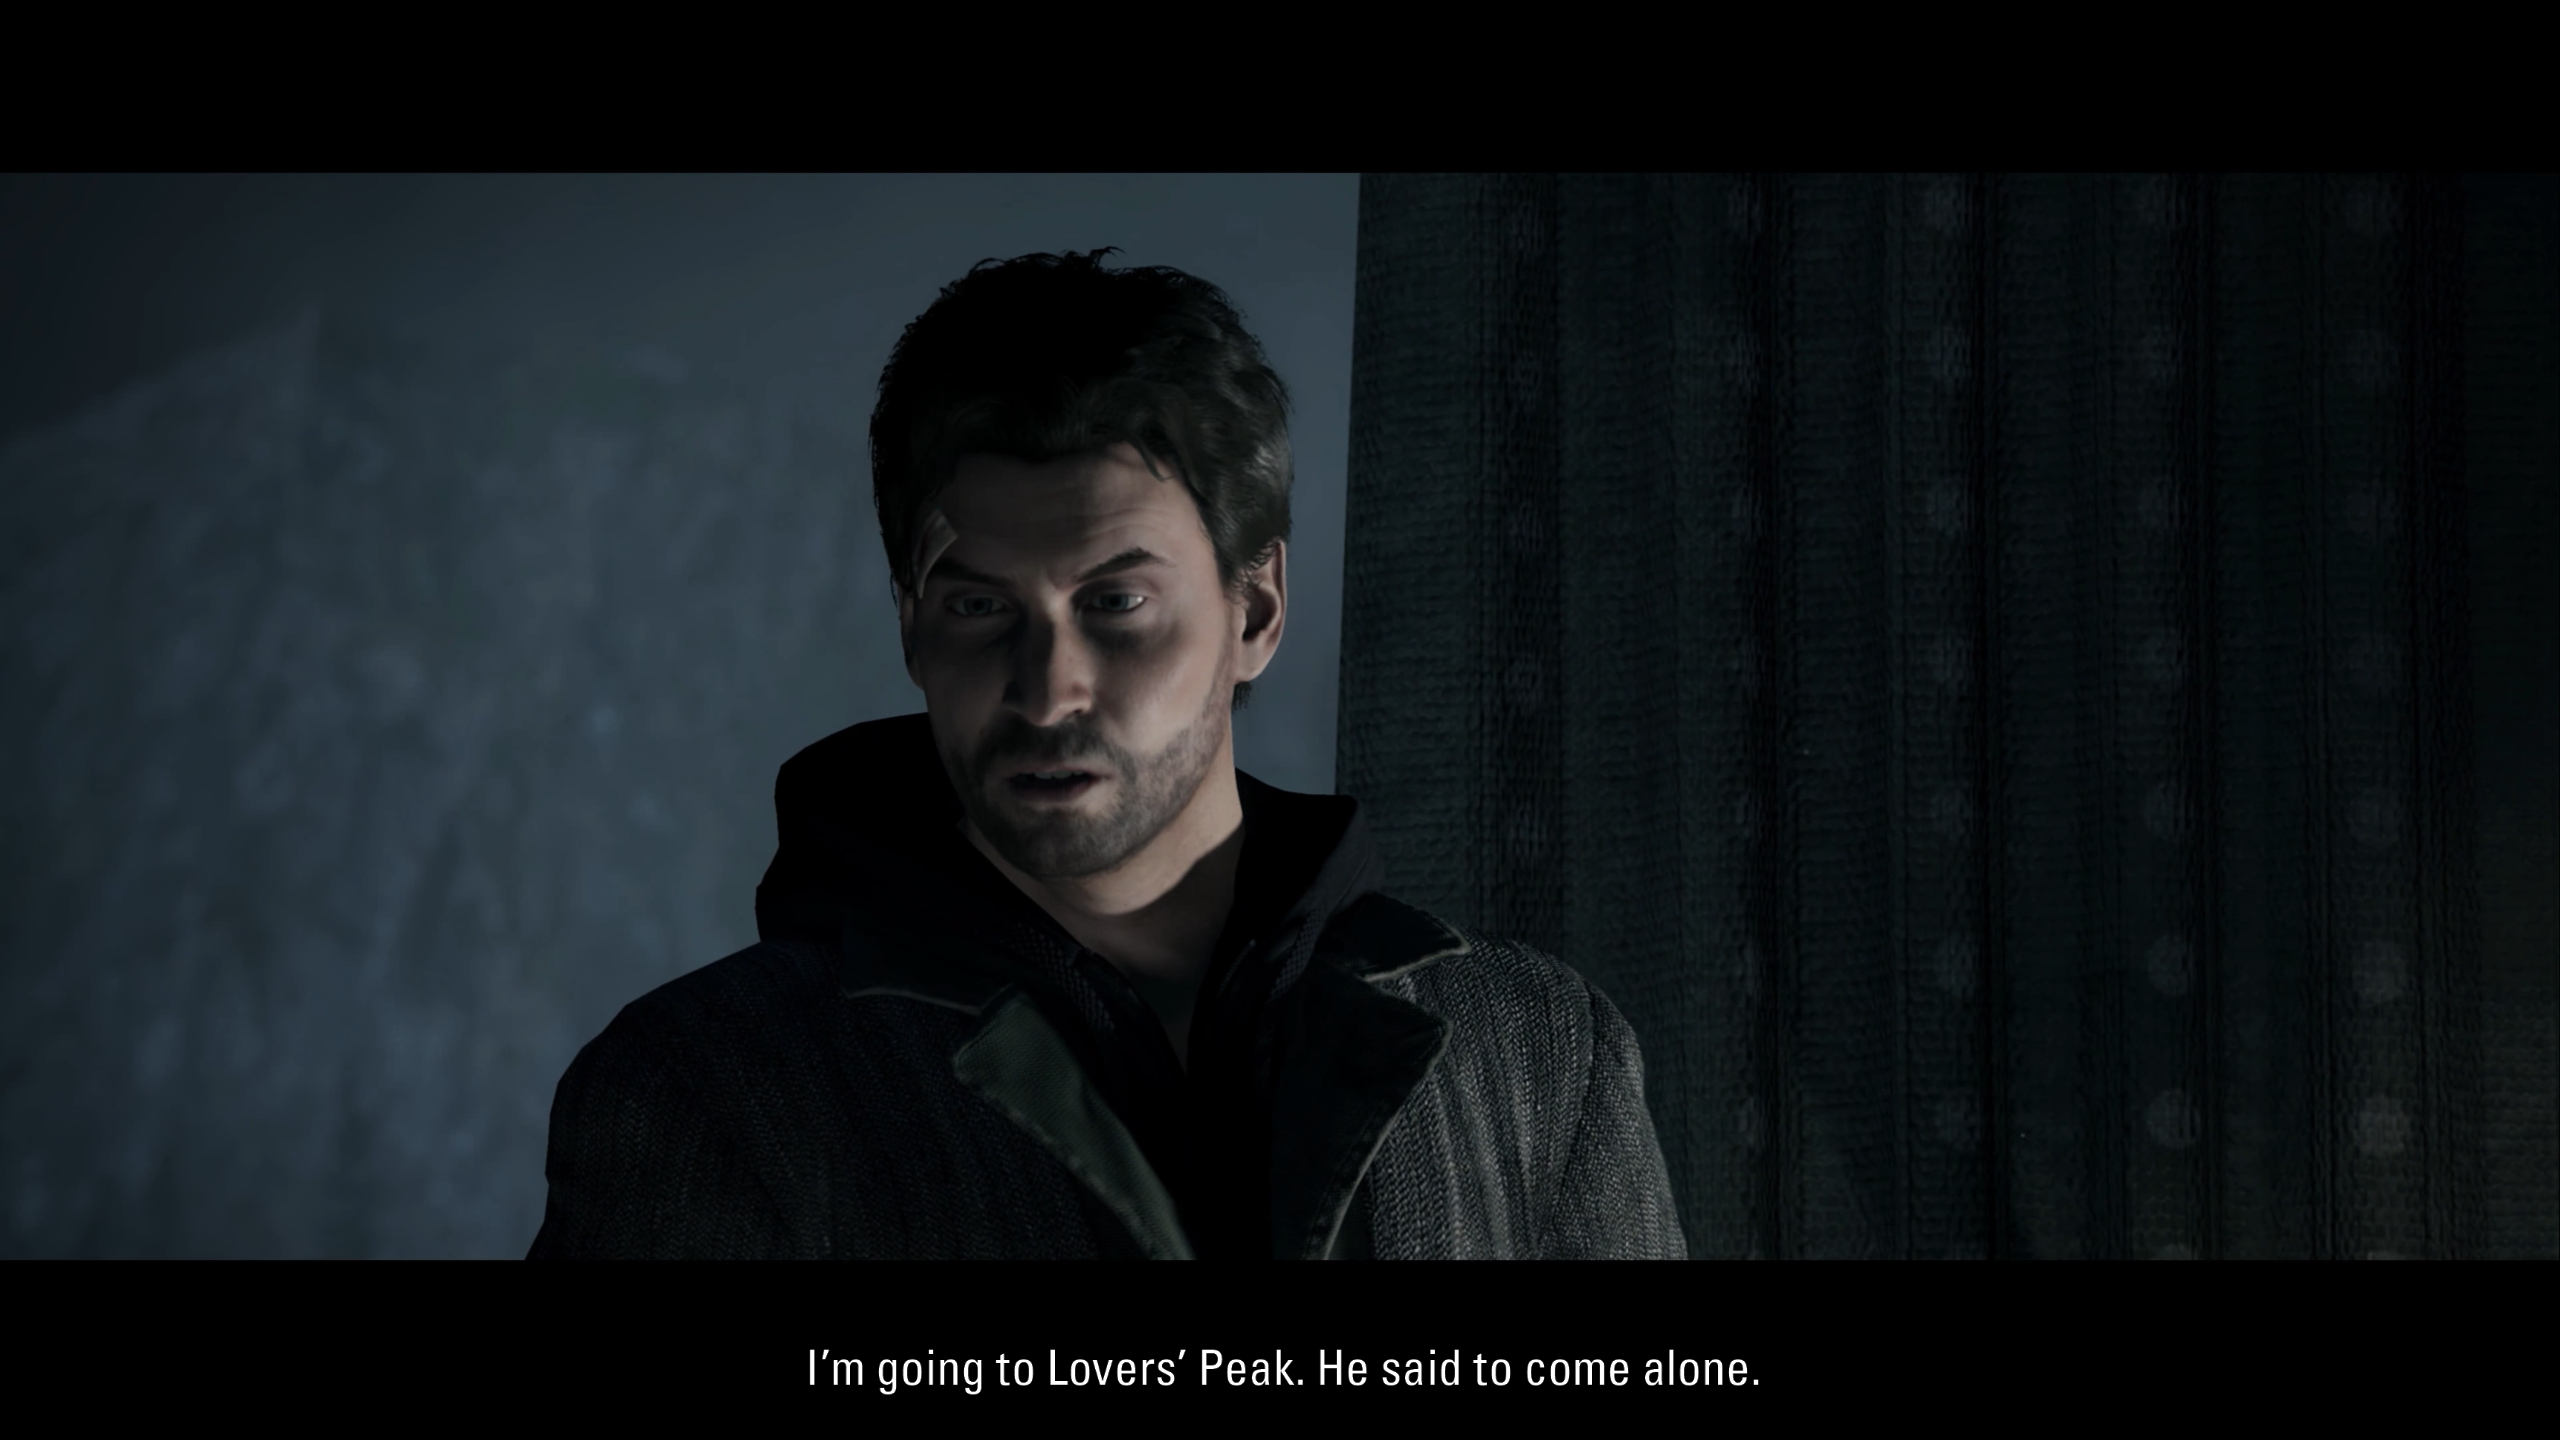 Is Alan Wake 2 Coming to PS4 and Xbox One? - Answered - Prima Games